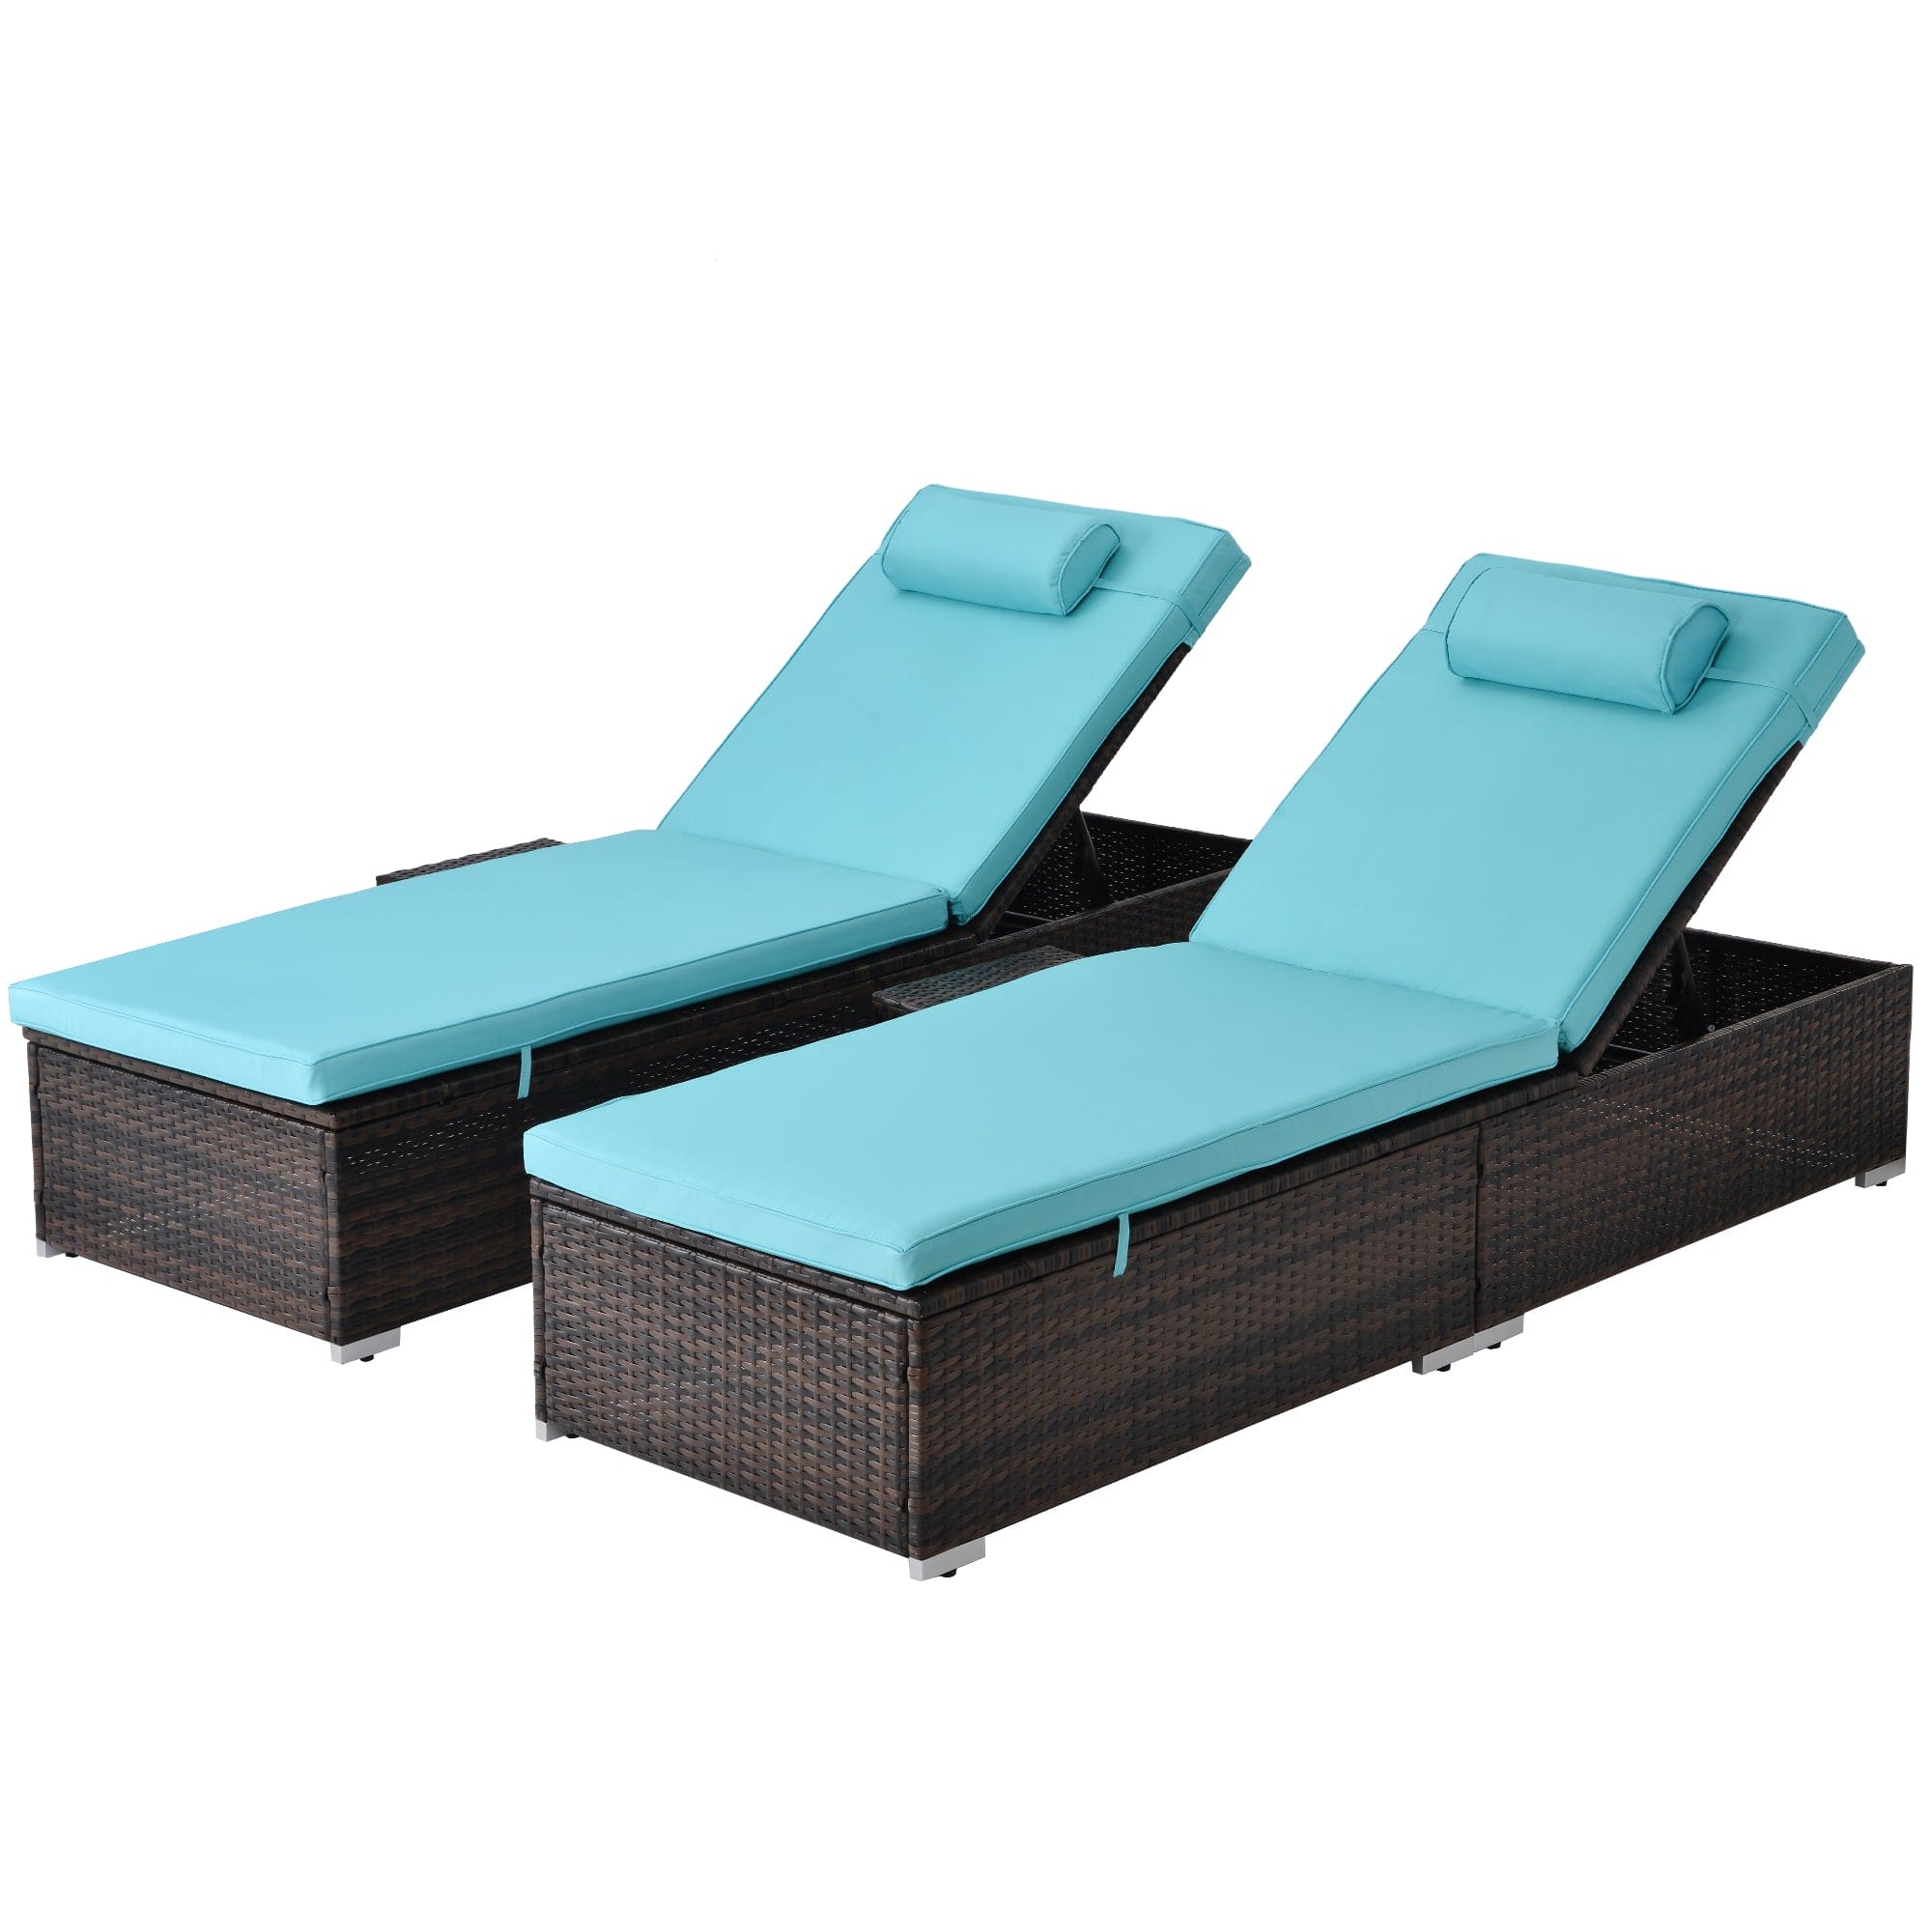 Outdoor PE Wicker Chaise Lounge - 2 Piece patio lounge chair; chase longue; lazy boy recliner;outdoor lounge chairs set of 2;beach chairs; recliner chair with side table